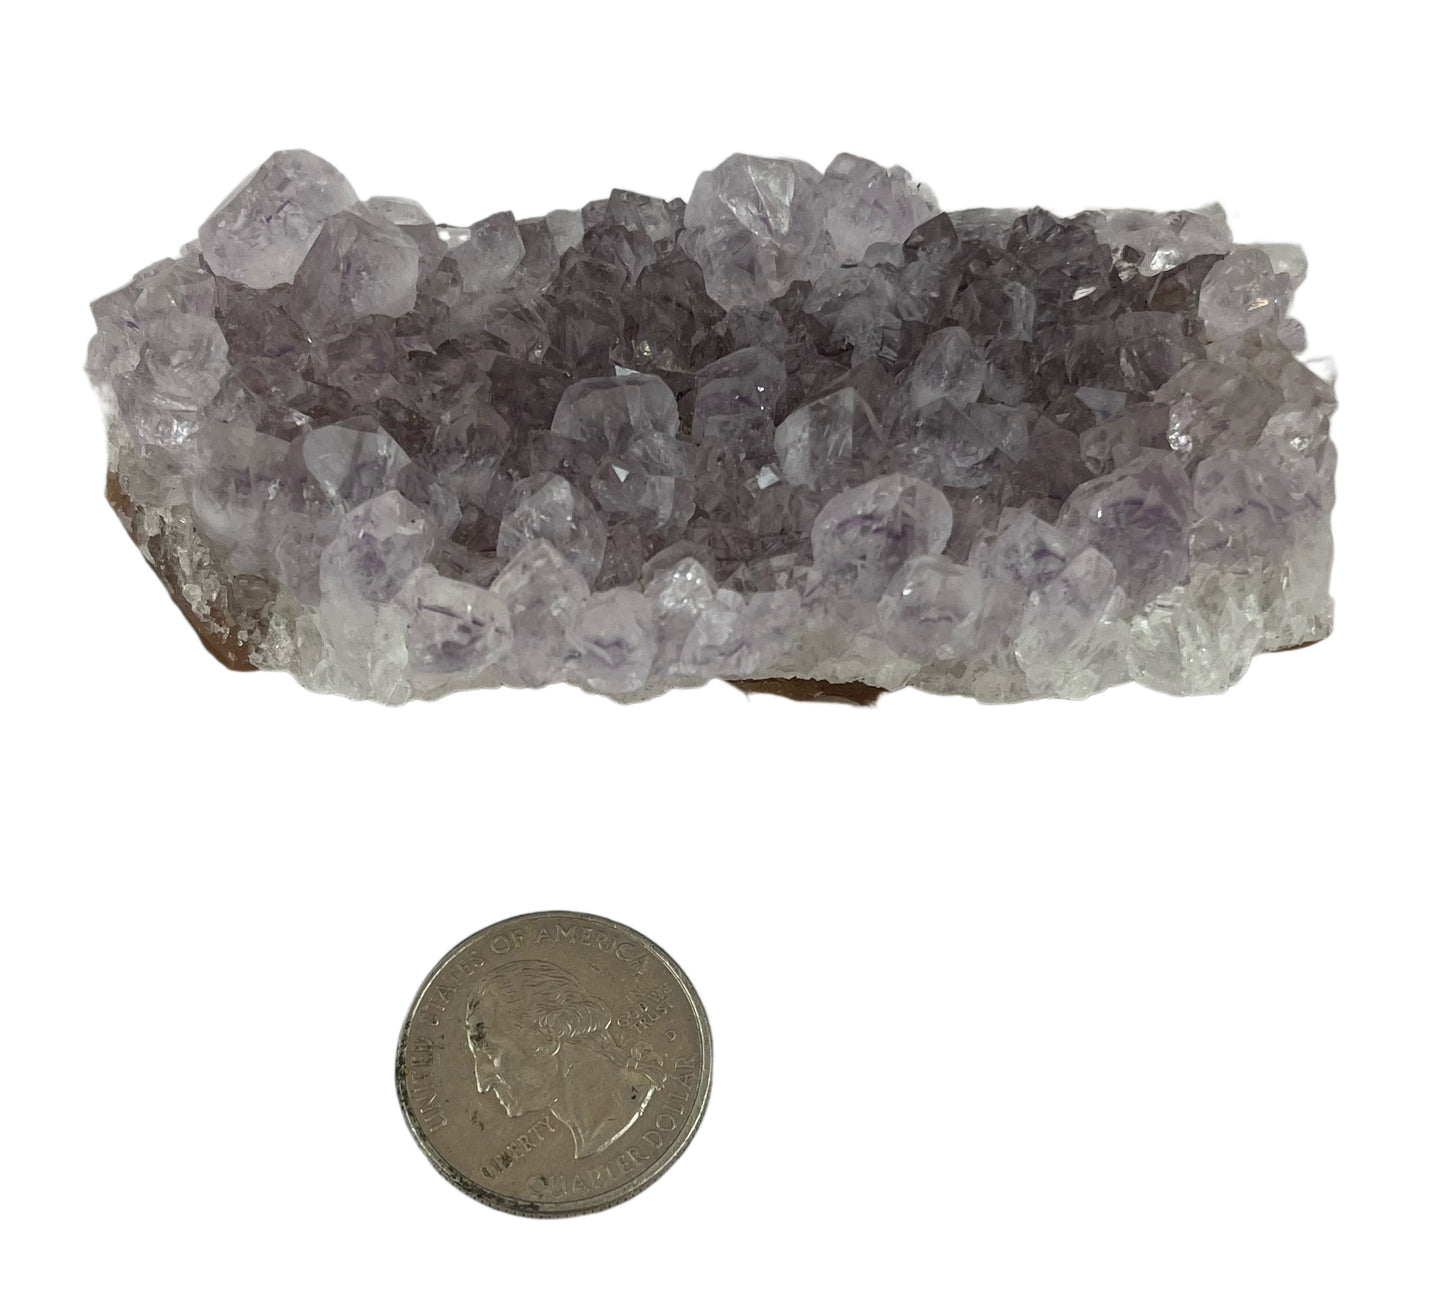 Palm sized purple crystal, roughly 2 in by 3.5 in